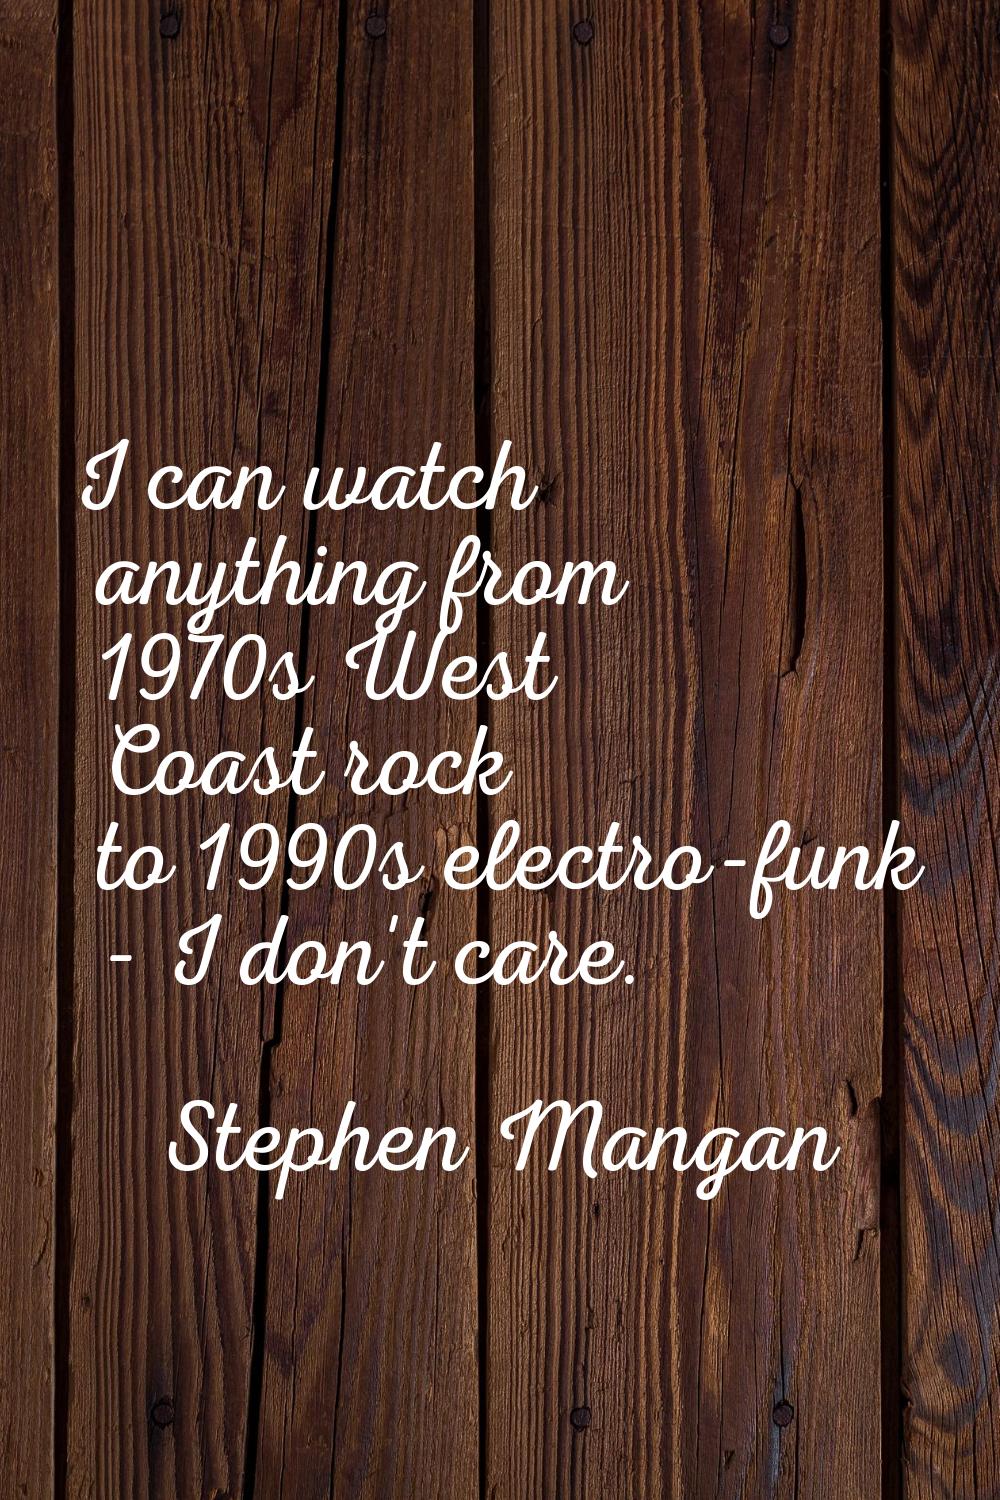 I can watch anything from 1970s West Coast rock to 1990s electro-funk - I don't care.